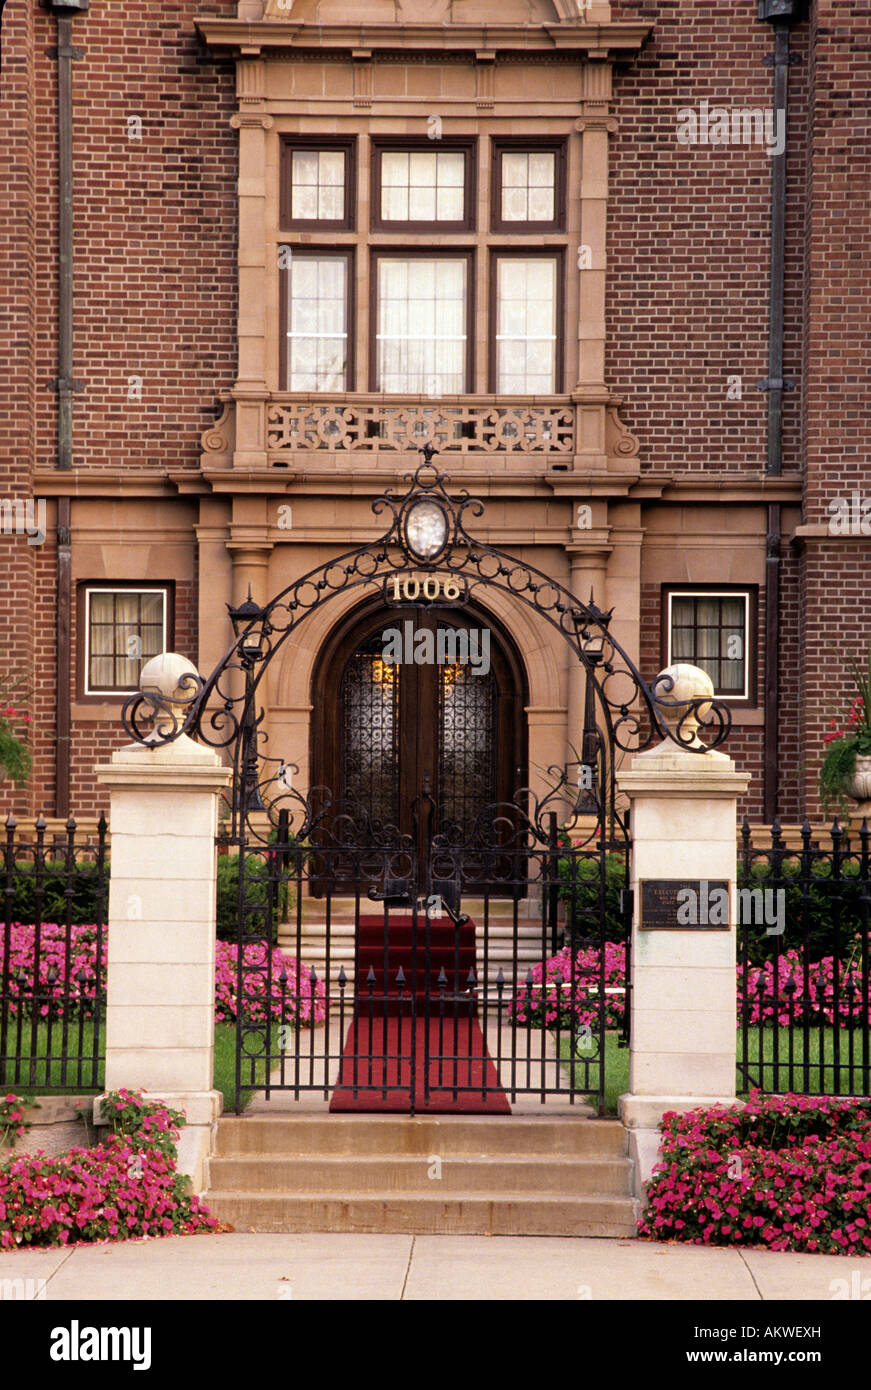 FRONT ENTRANCE TO GOVERNOR'S MANSION IN ST.PAUL, MINNESOTA ON HISTORIC SUMMIT AVENUE. Stock Photo